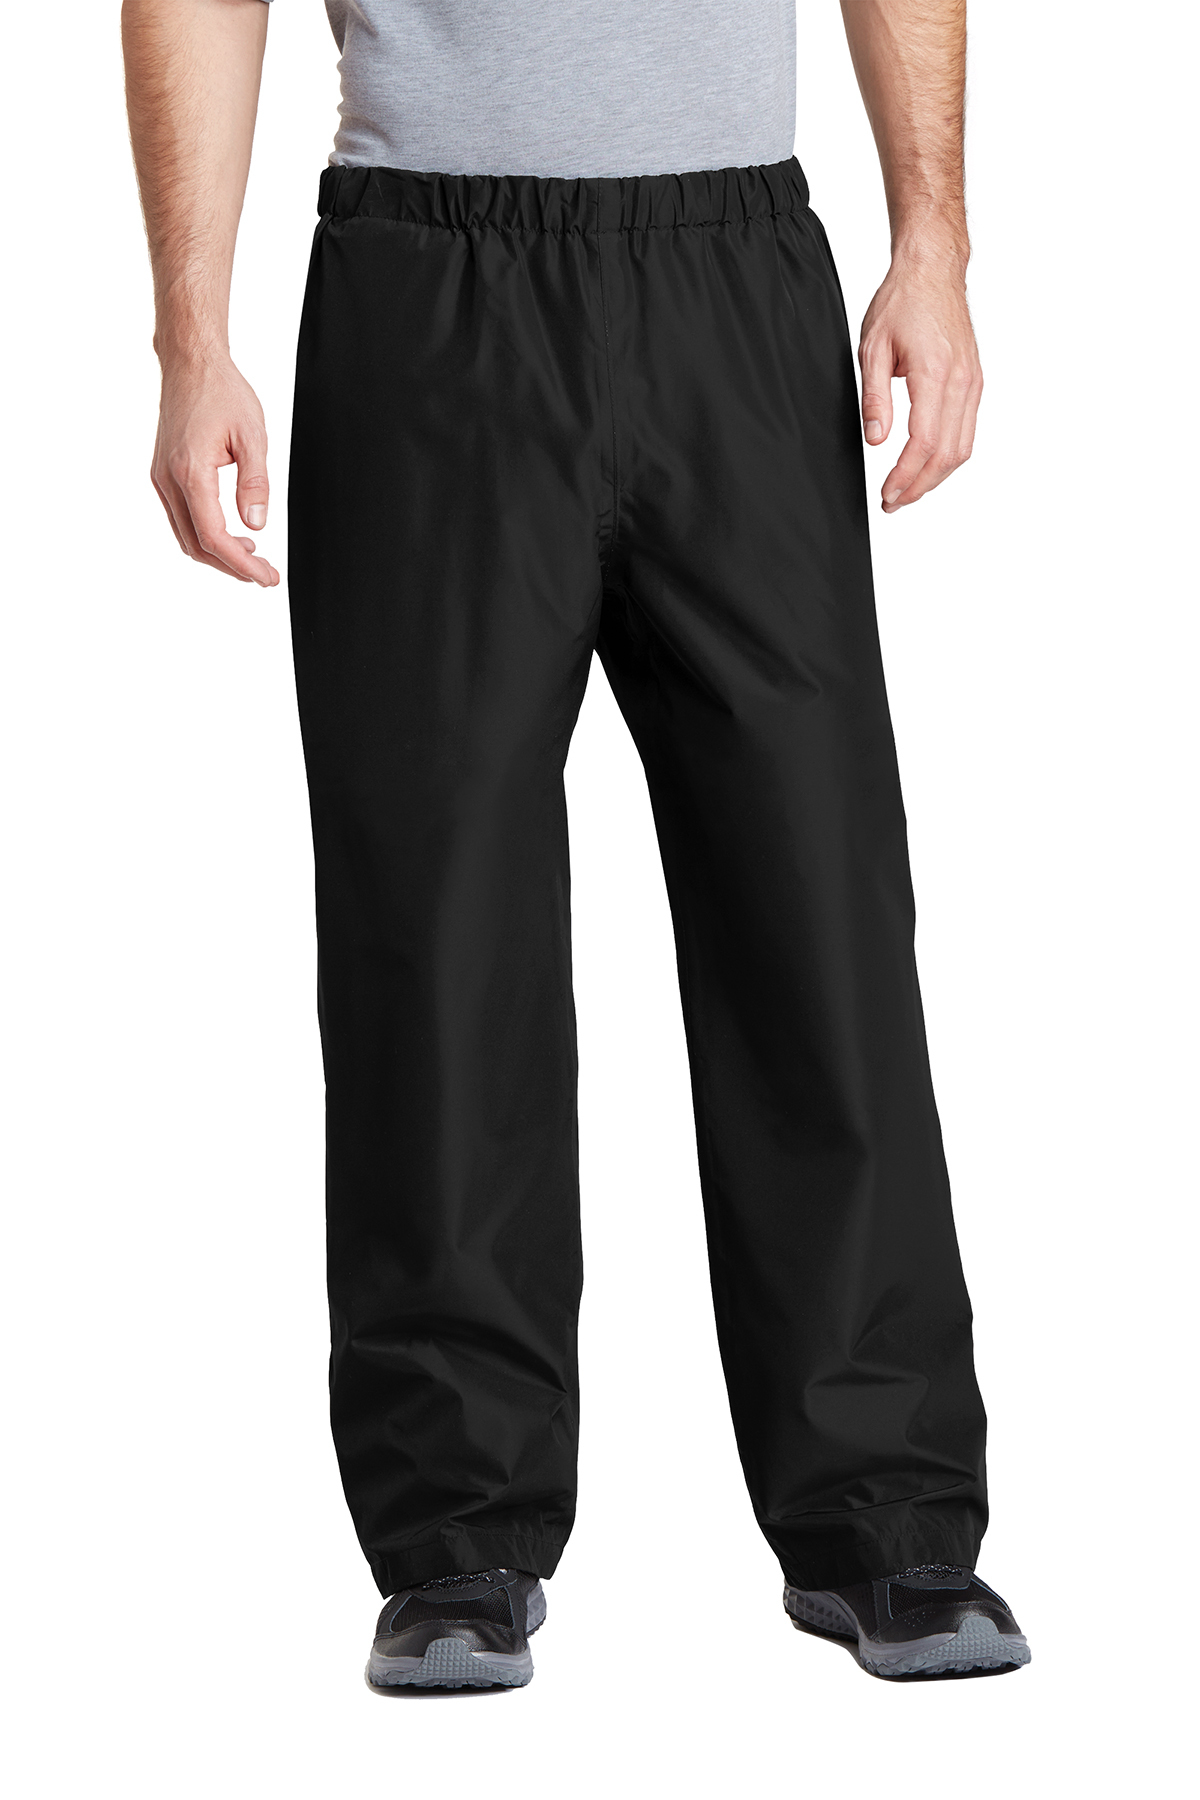 Port Authority Torrent Waterproof Pant, Product